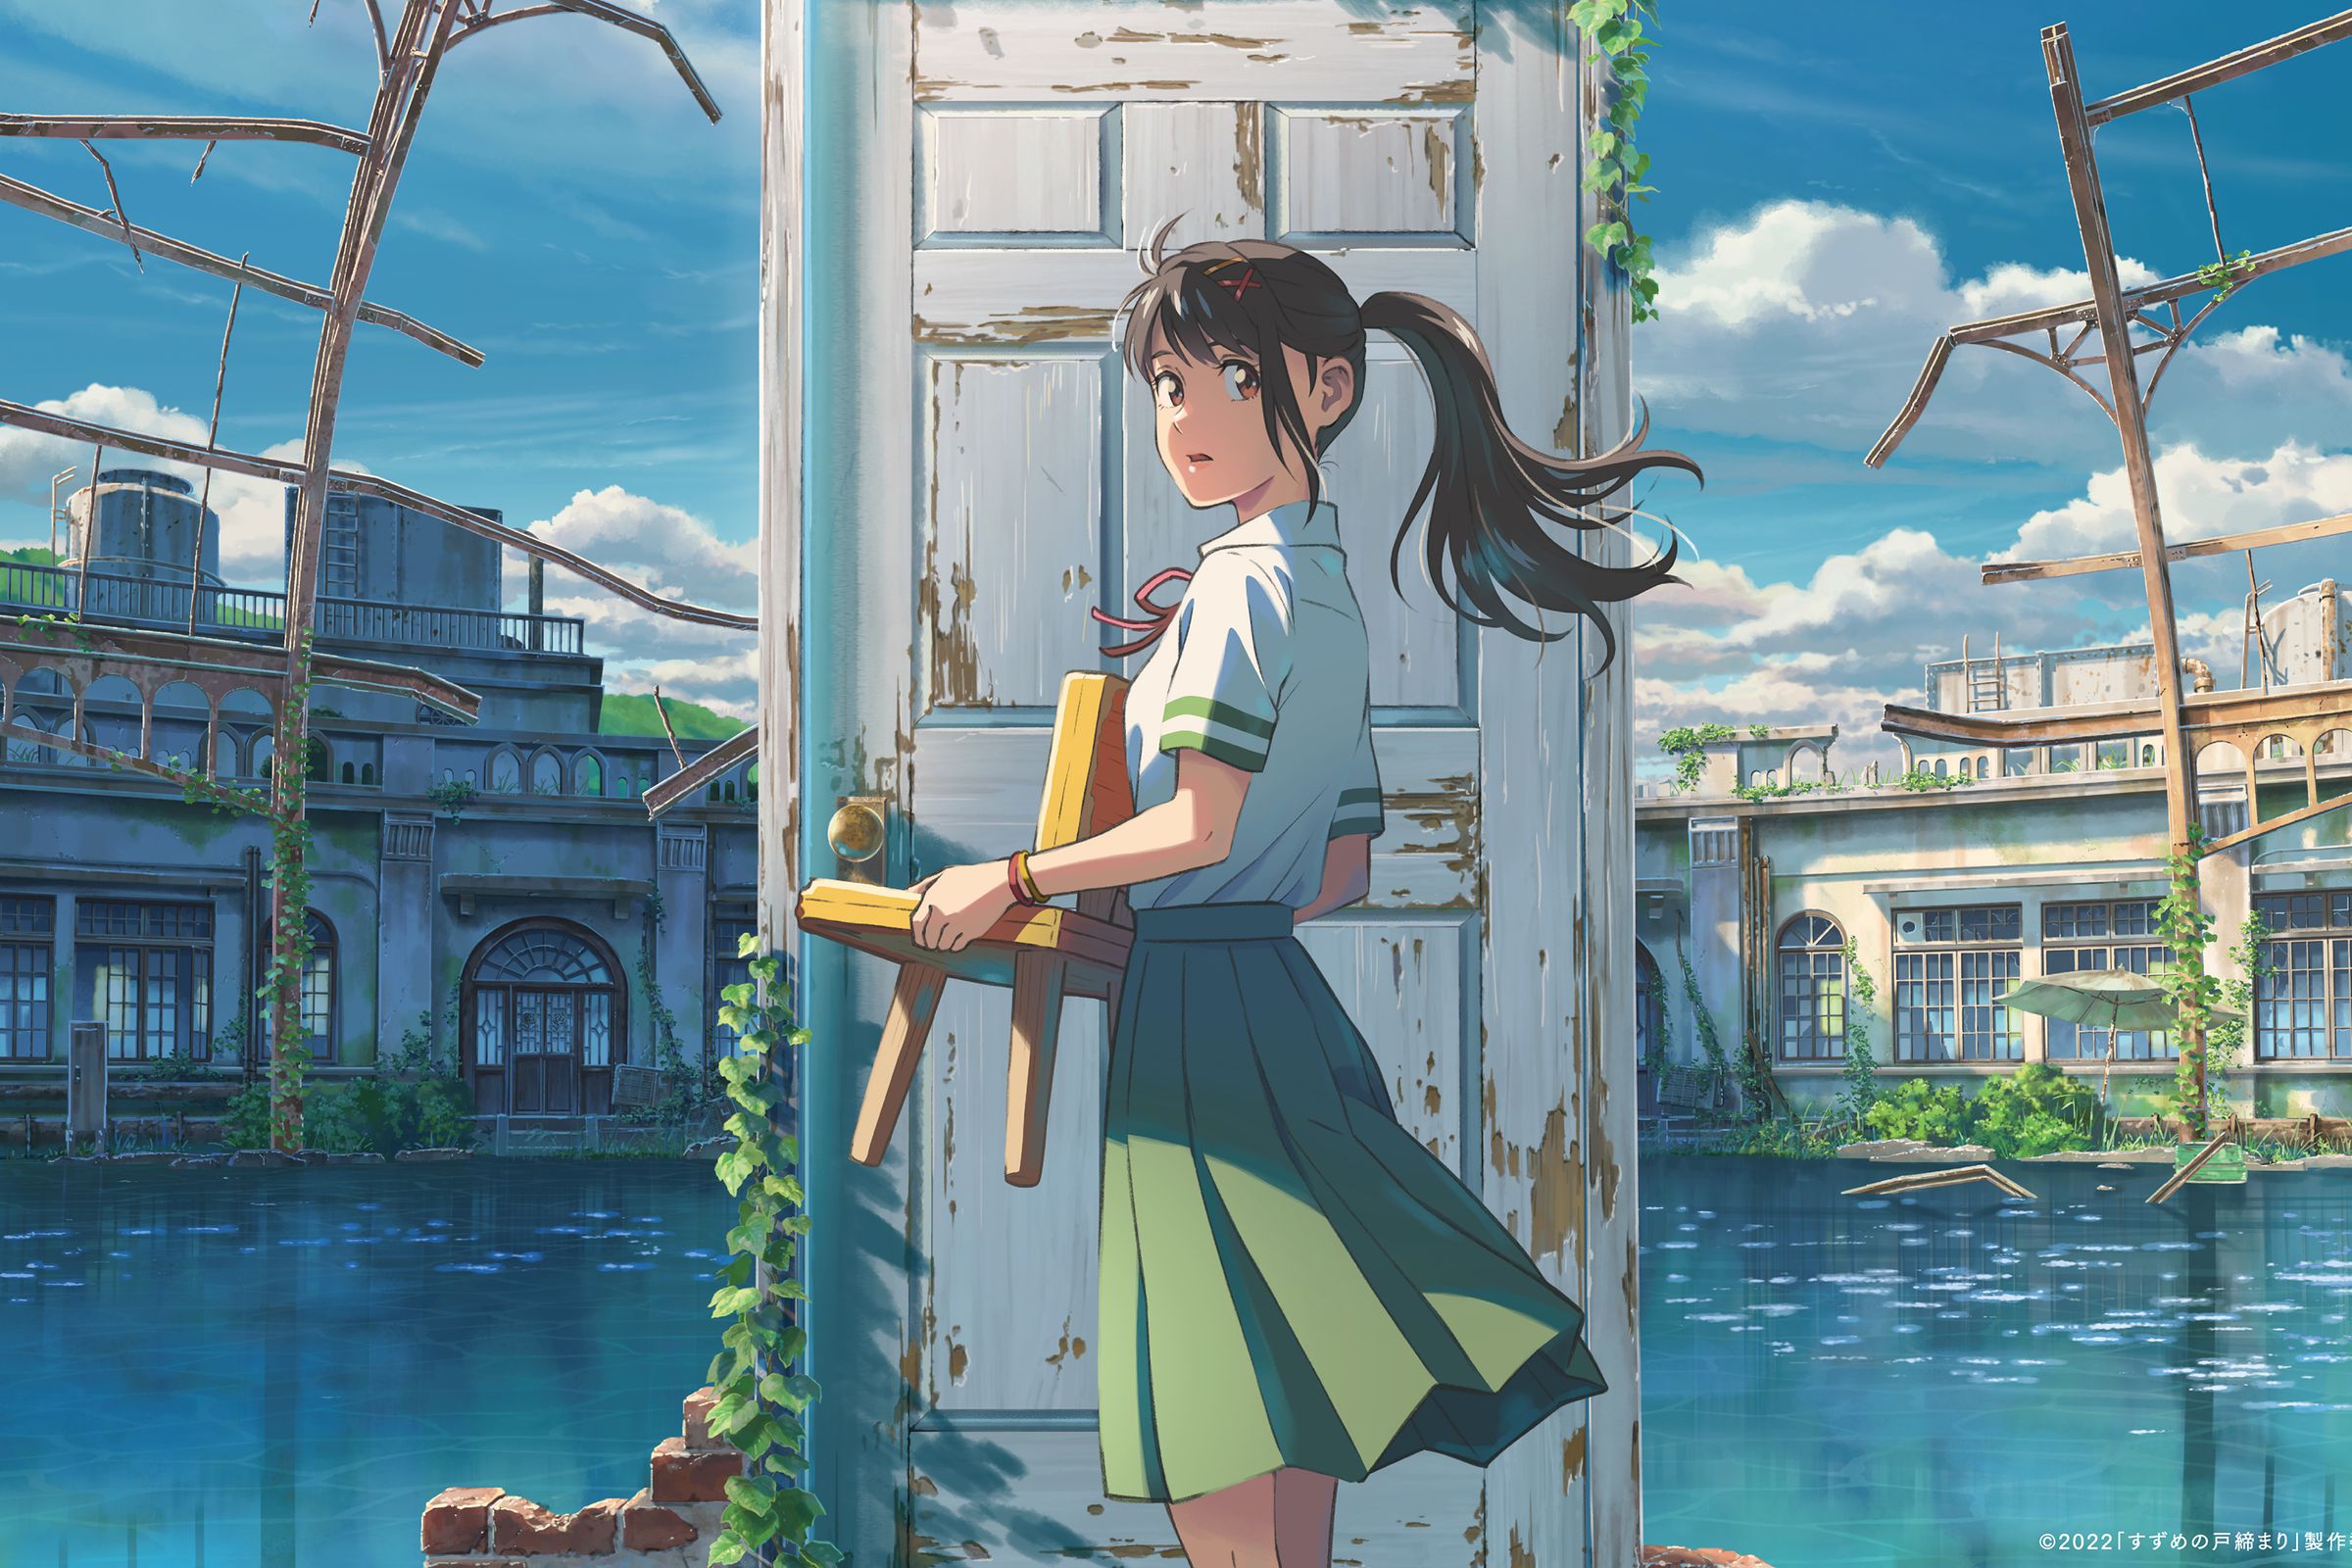 A girl in a Japanese high school uniform holding a children’s stool and standing in front of a door standing independently of any walls. The door is old, covered in ivy, and she’s standing at the center of a pool of water in what looks like an abandoned hot springs spa.